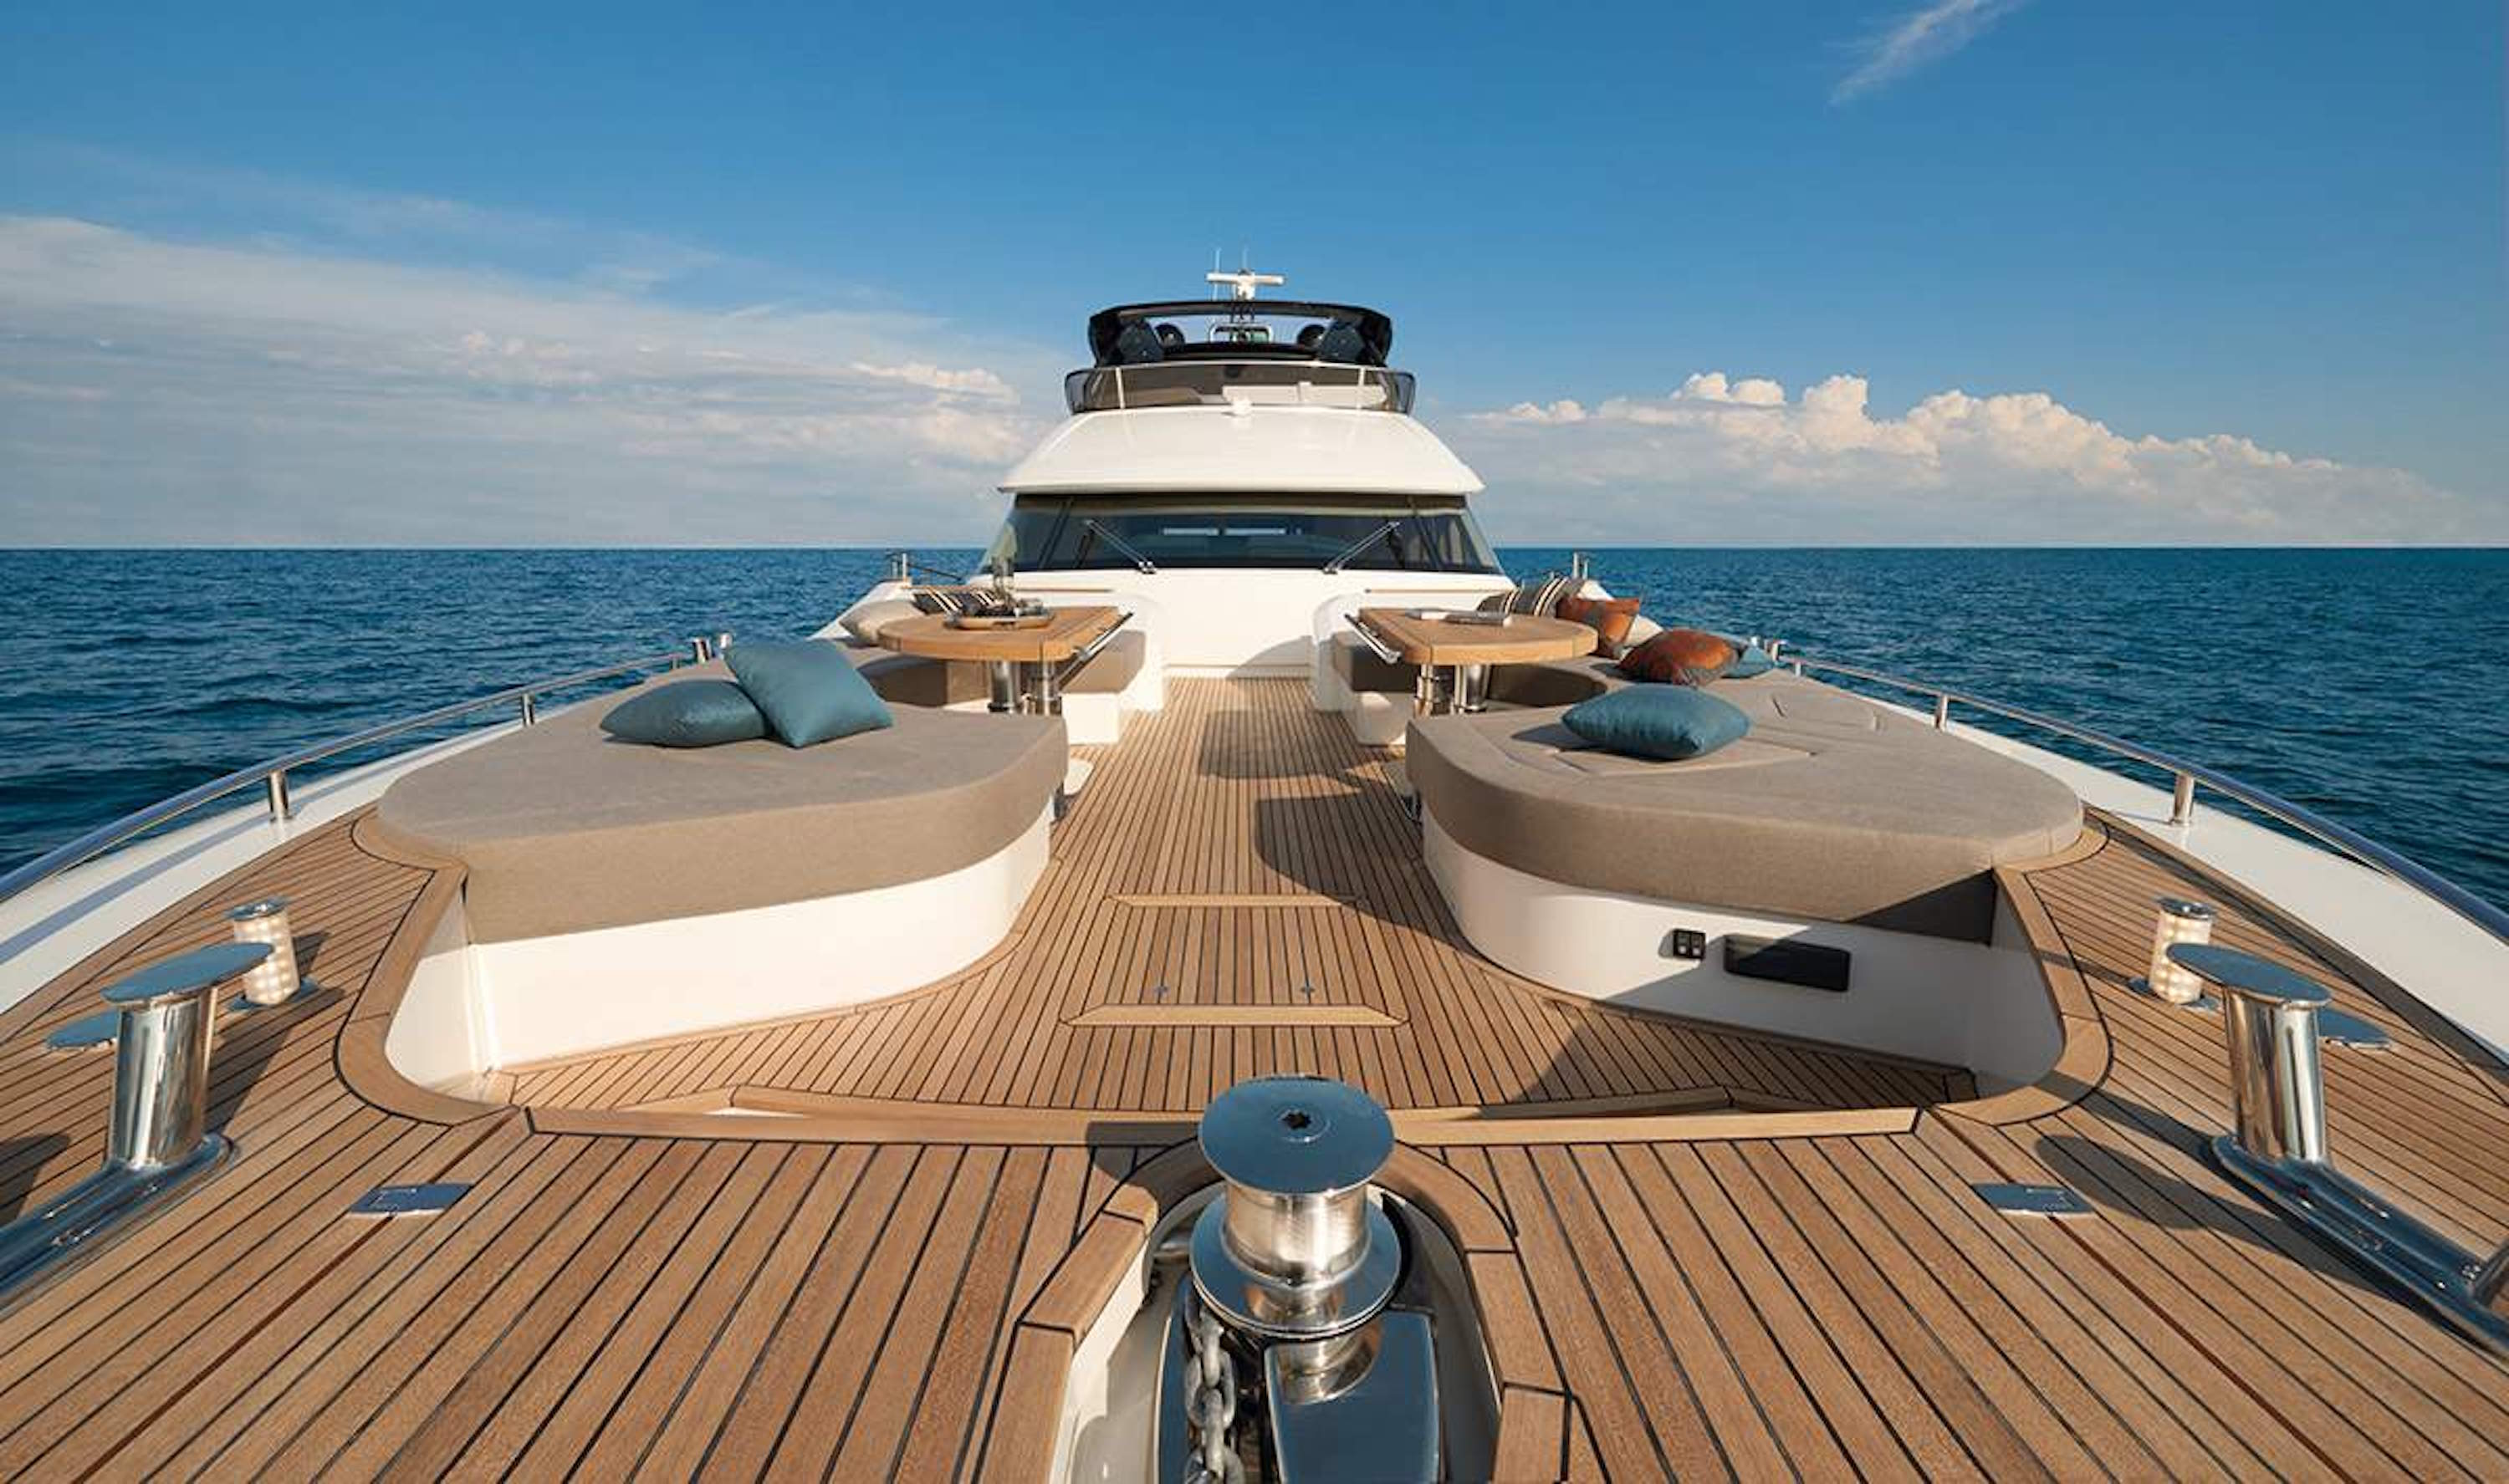 Sail the high seas in splendour aboard this new luxury superyacht